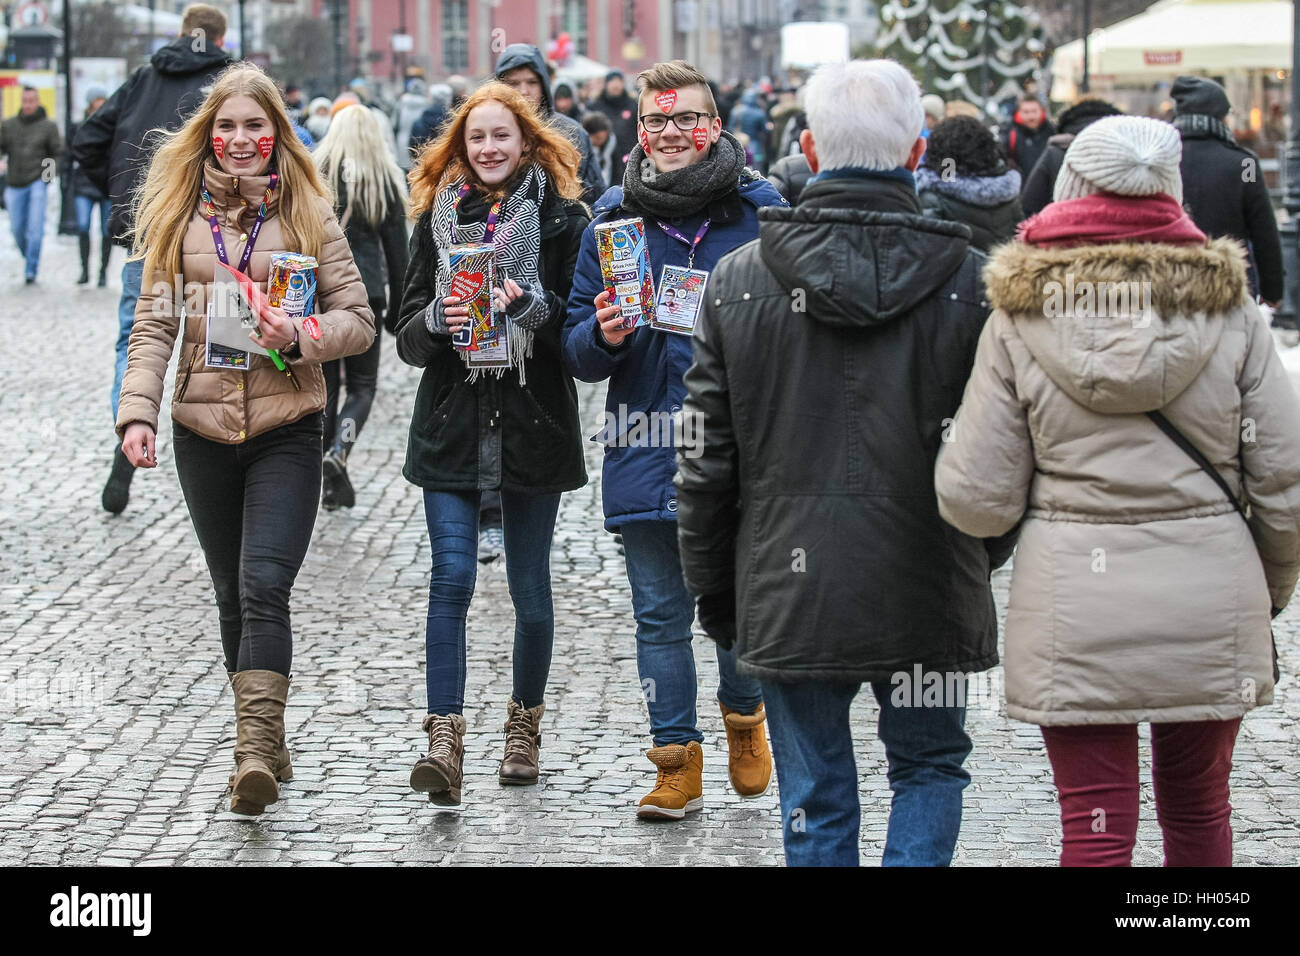 Gdansk, Poland. 15th January 2017. Volunteers collecting money are seen during 25th Grand Finale of Great Orchestra of Christmas Charity (WOSP) on January 15th, 2017 in Gdansk. Over 120 thousands of volunteers across the Poland collect money on the streets in special cans labelled with a red heart. This year finale is once again devoted to paediatrics and geriatrics. Credit: Michal Fludra/Alamy Live News Stock Photo